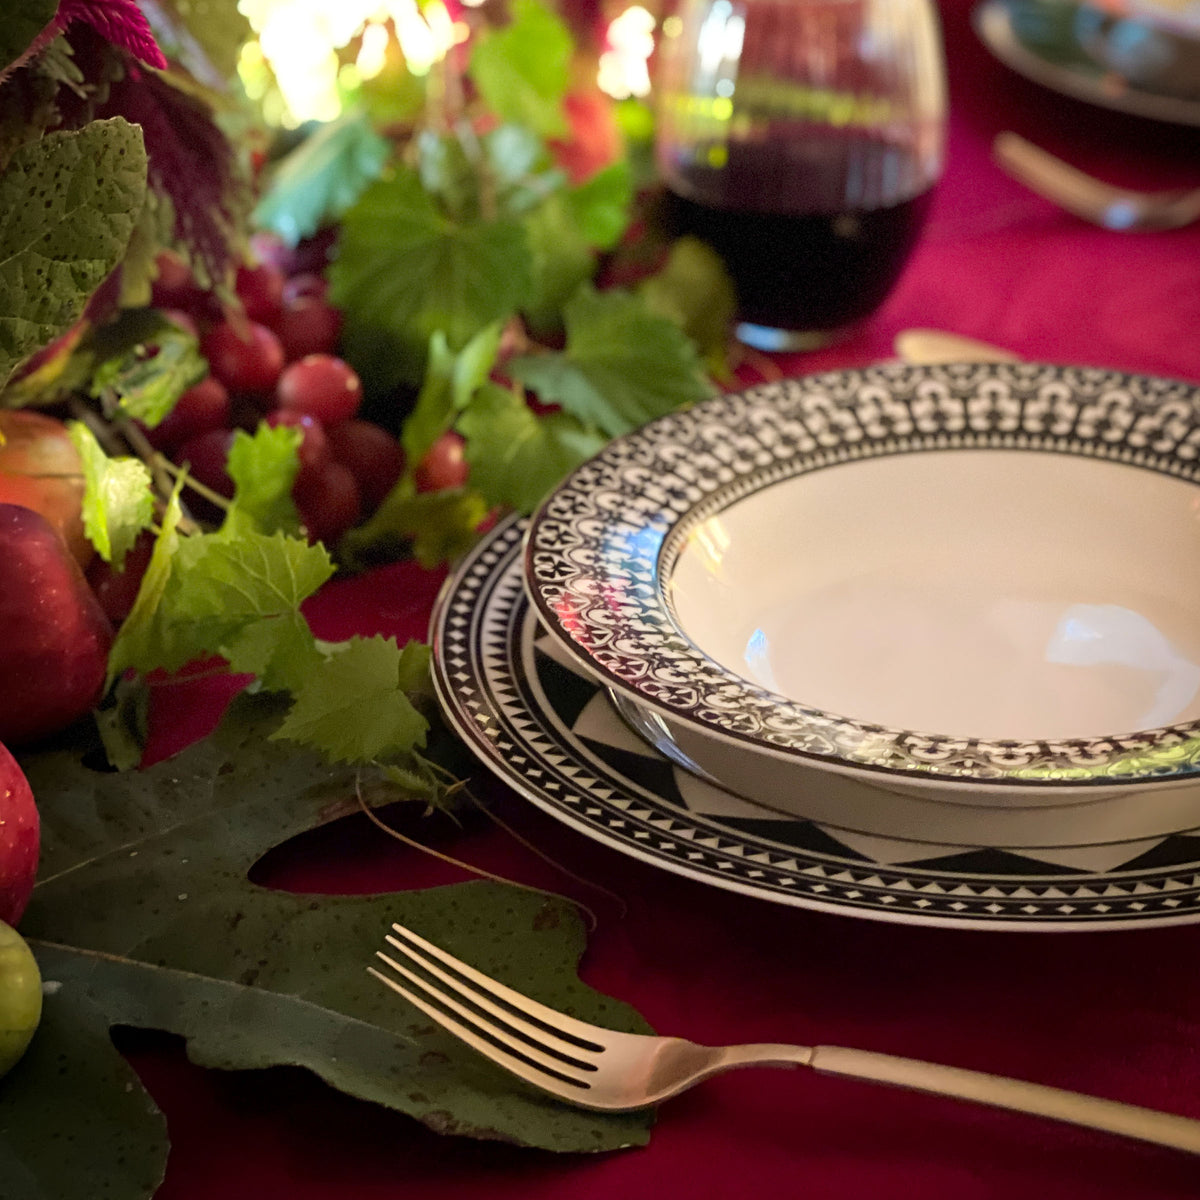 Elegant table setting with sophisticated dinnerware, a Fez Rimmed Dinner Plate by Caskata Artisanal Home featuring Moroccan patterns, a fork, glass of red wine, and an arrangement of fruits and greenery on a red tablecloth.